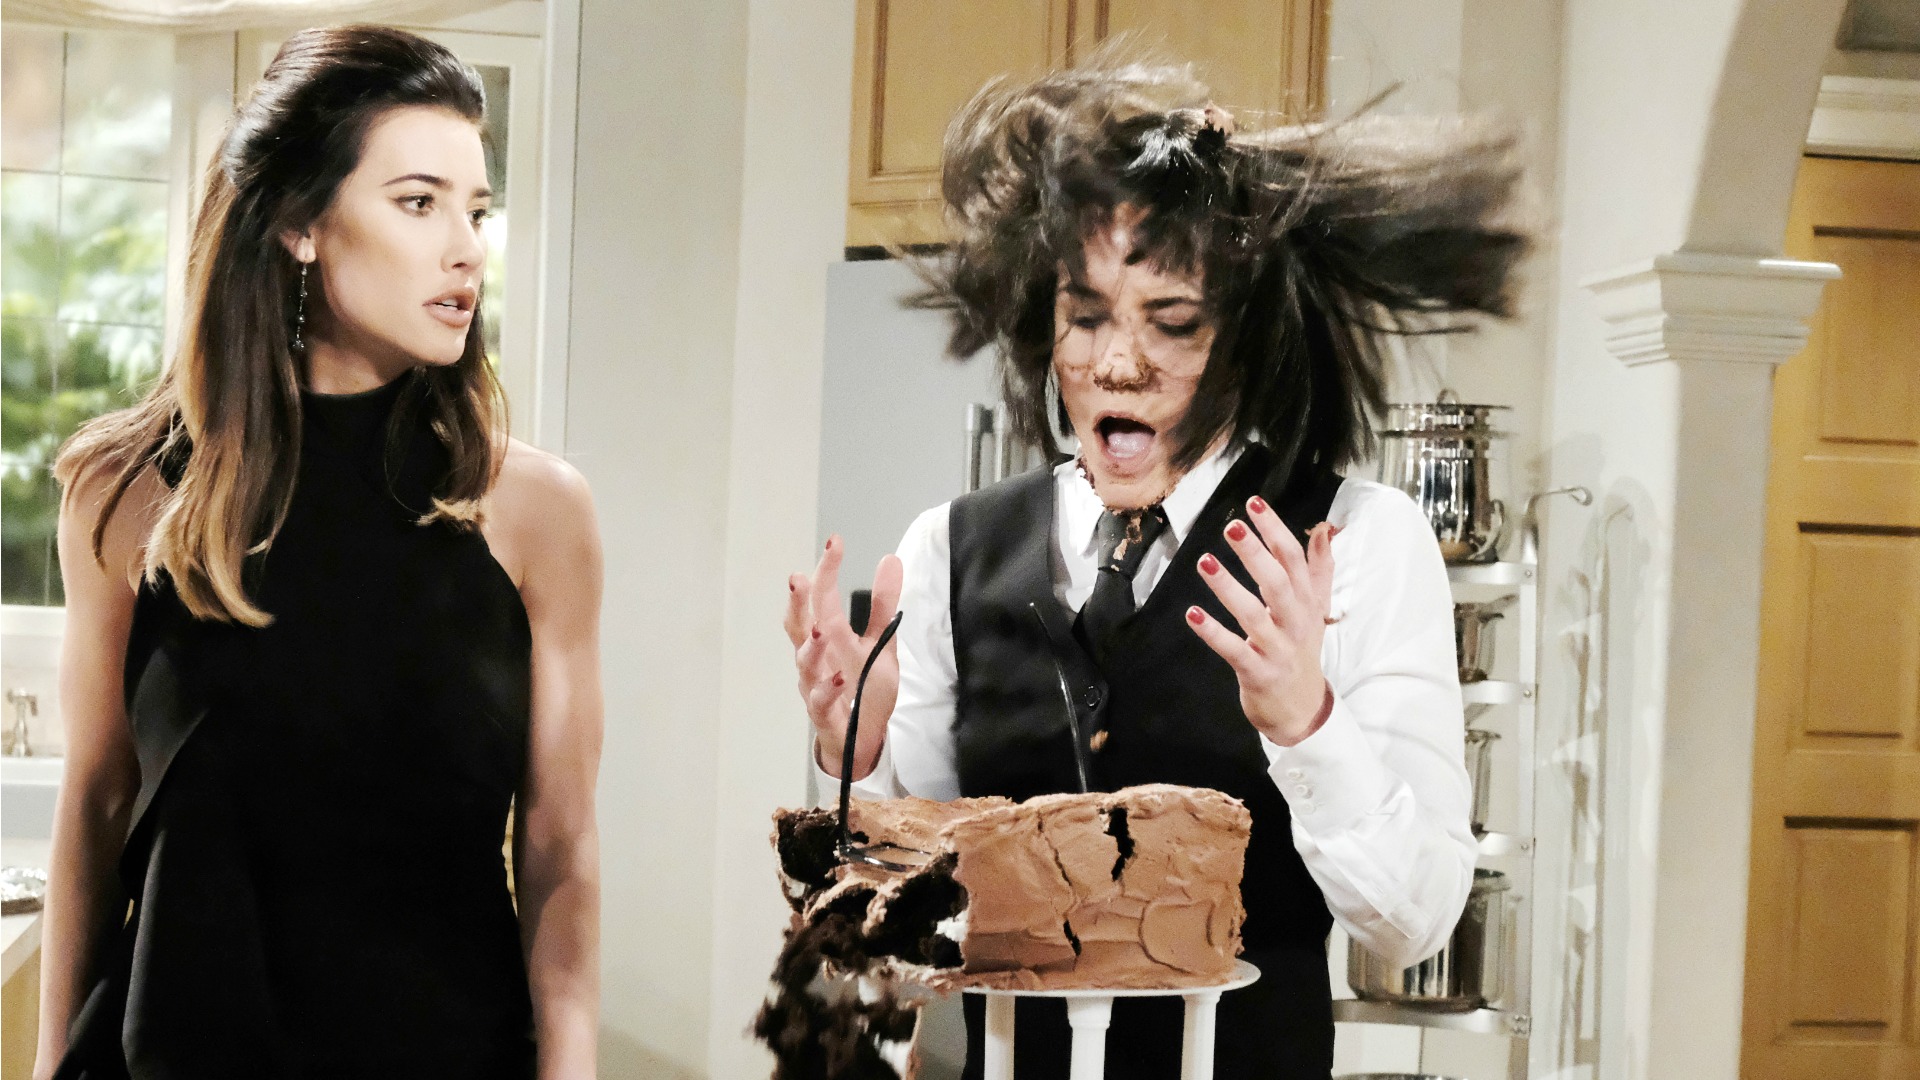 Steffy proves revenge is a piece of cake.